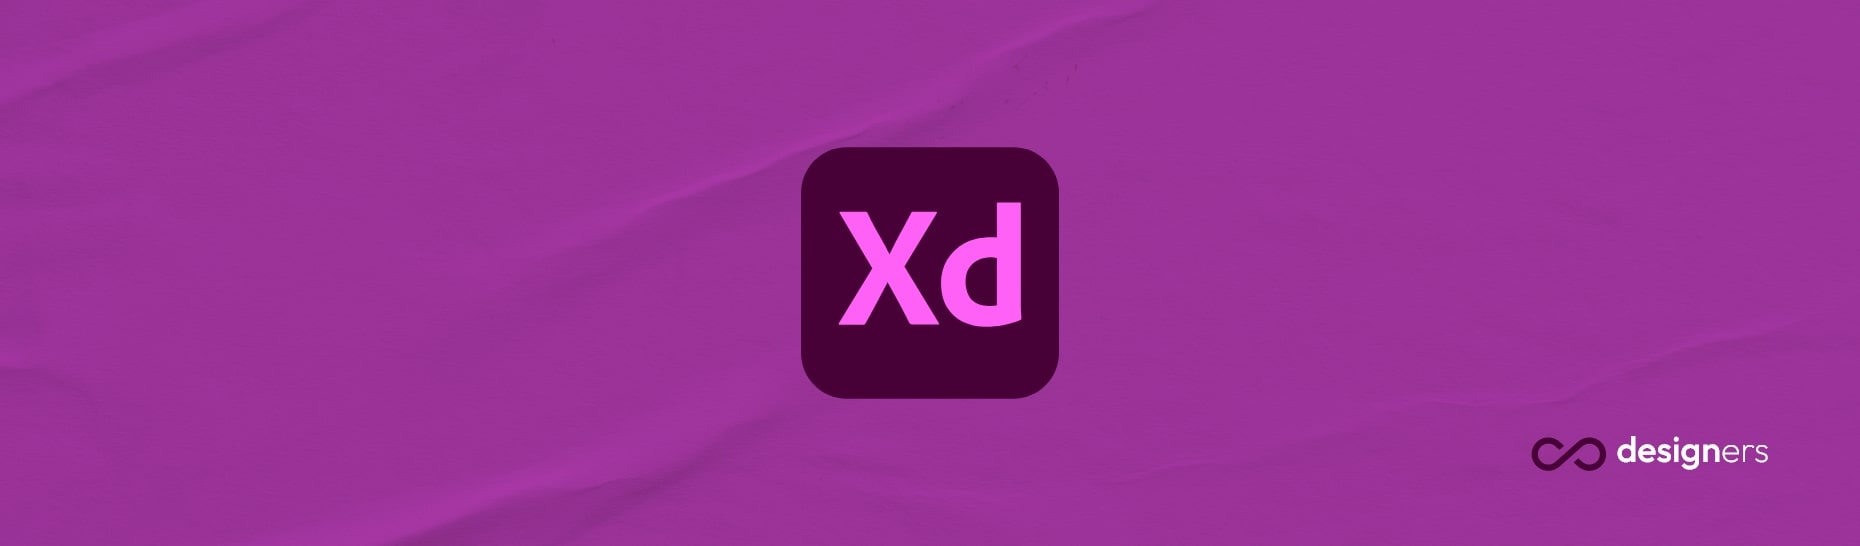 Does Adobe XD require coding?